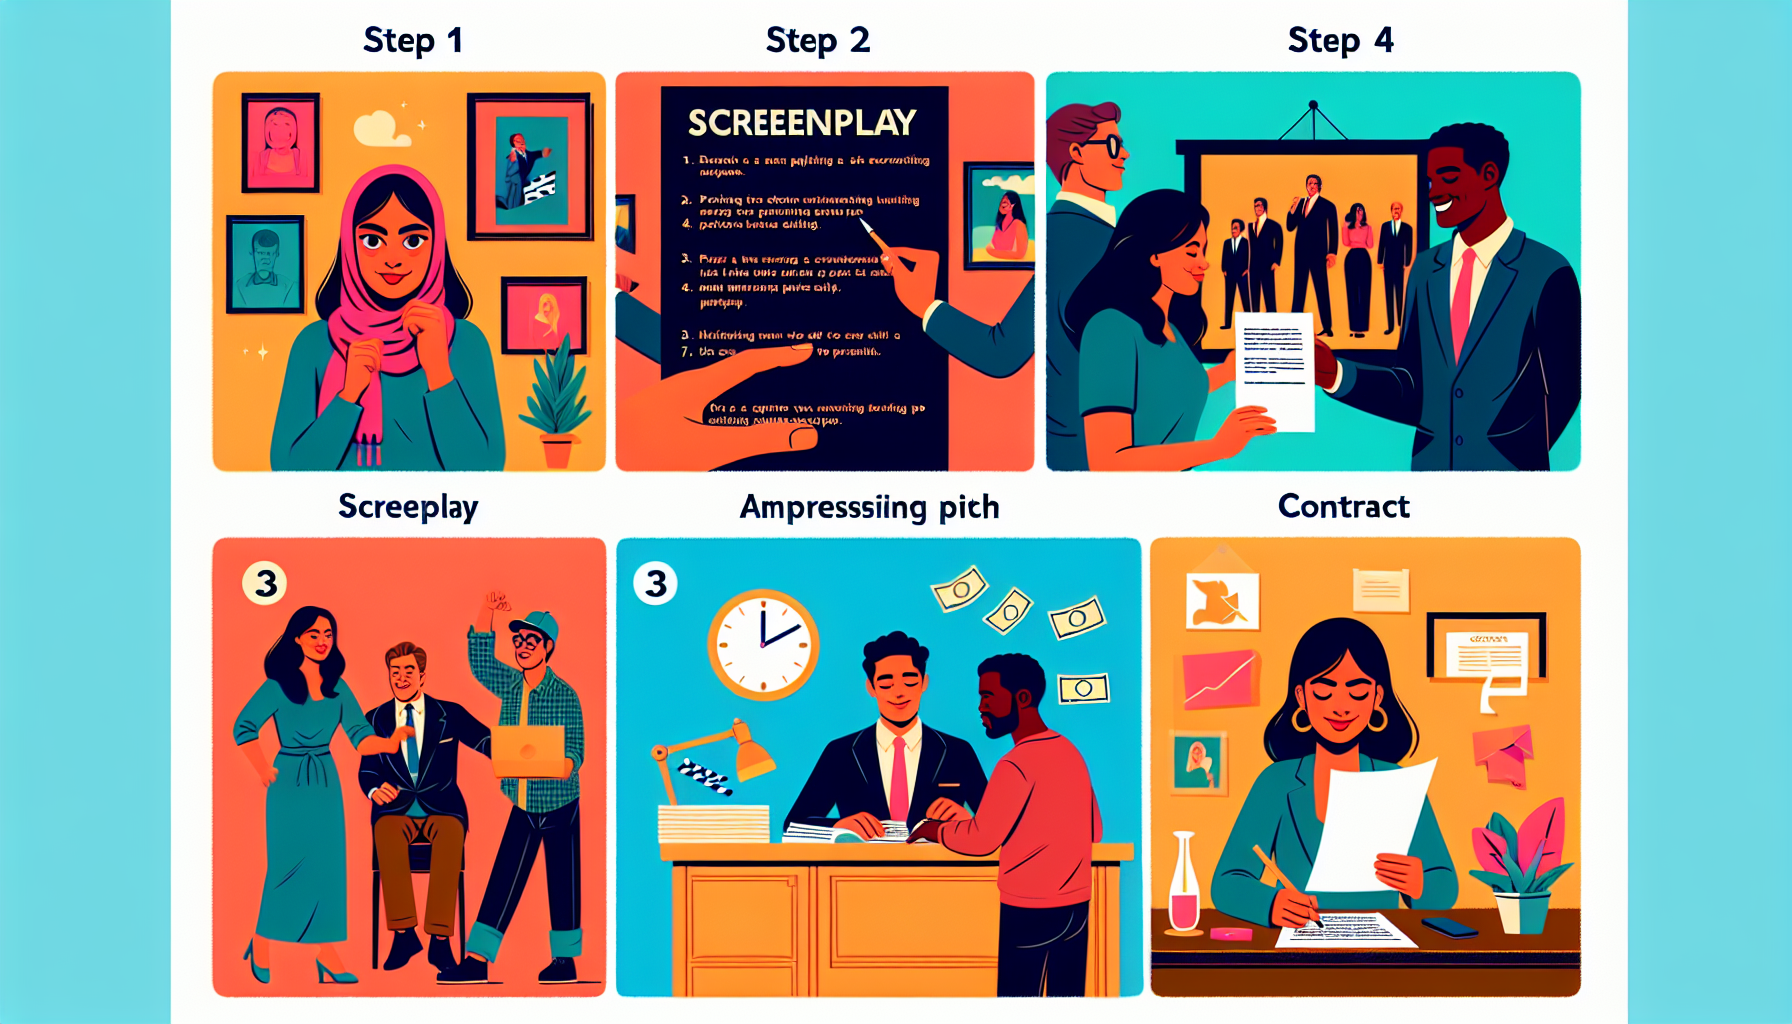 A modern, colorful, step-by-step visual guide chart demonstrating the process of successfully selling a screenplay. Step 1: Depict a female Middle-Eastern writer polishing a screenplay. Step 2: Showcase a Caucasian man preparing an impressive pitch. Step 3: Illustrate a South Asian woman presenting the pitch confidently to a potential buyer, a black gentleman. Step 4: Display a Hispanic man signing a contract on a screenplay deal. Step 5: Demonstrate an East Asian woman celebrating the successful sale of her screenplay.